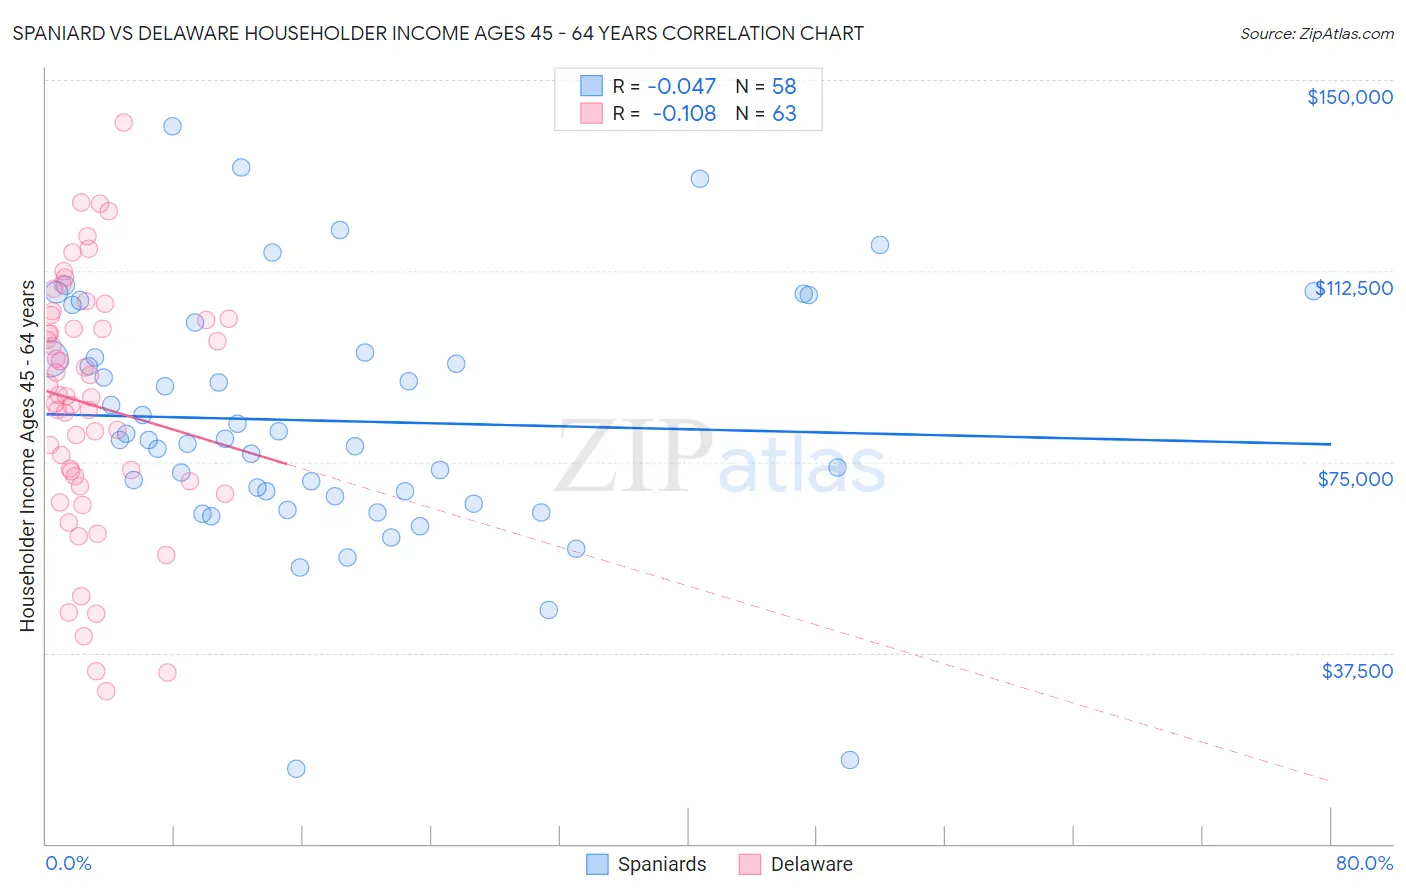 Spaniard vs Delaware Householder Income Ages 45 - 64 years